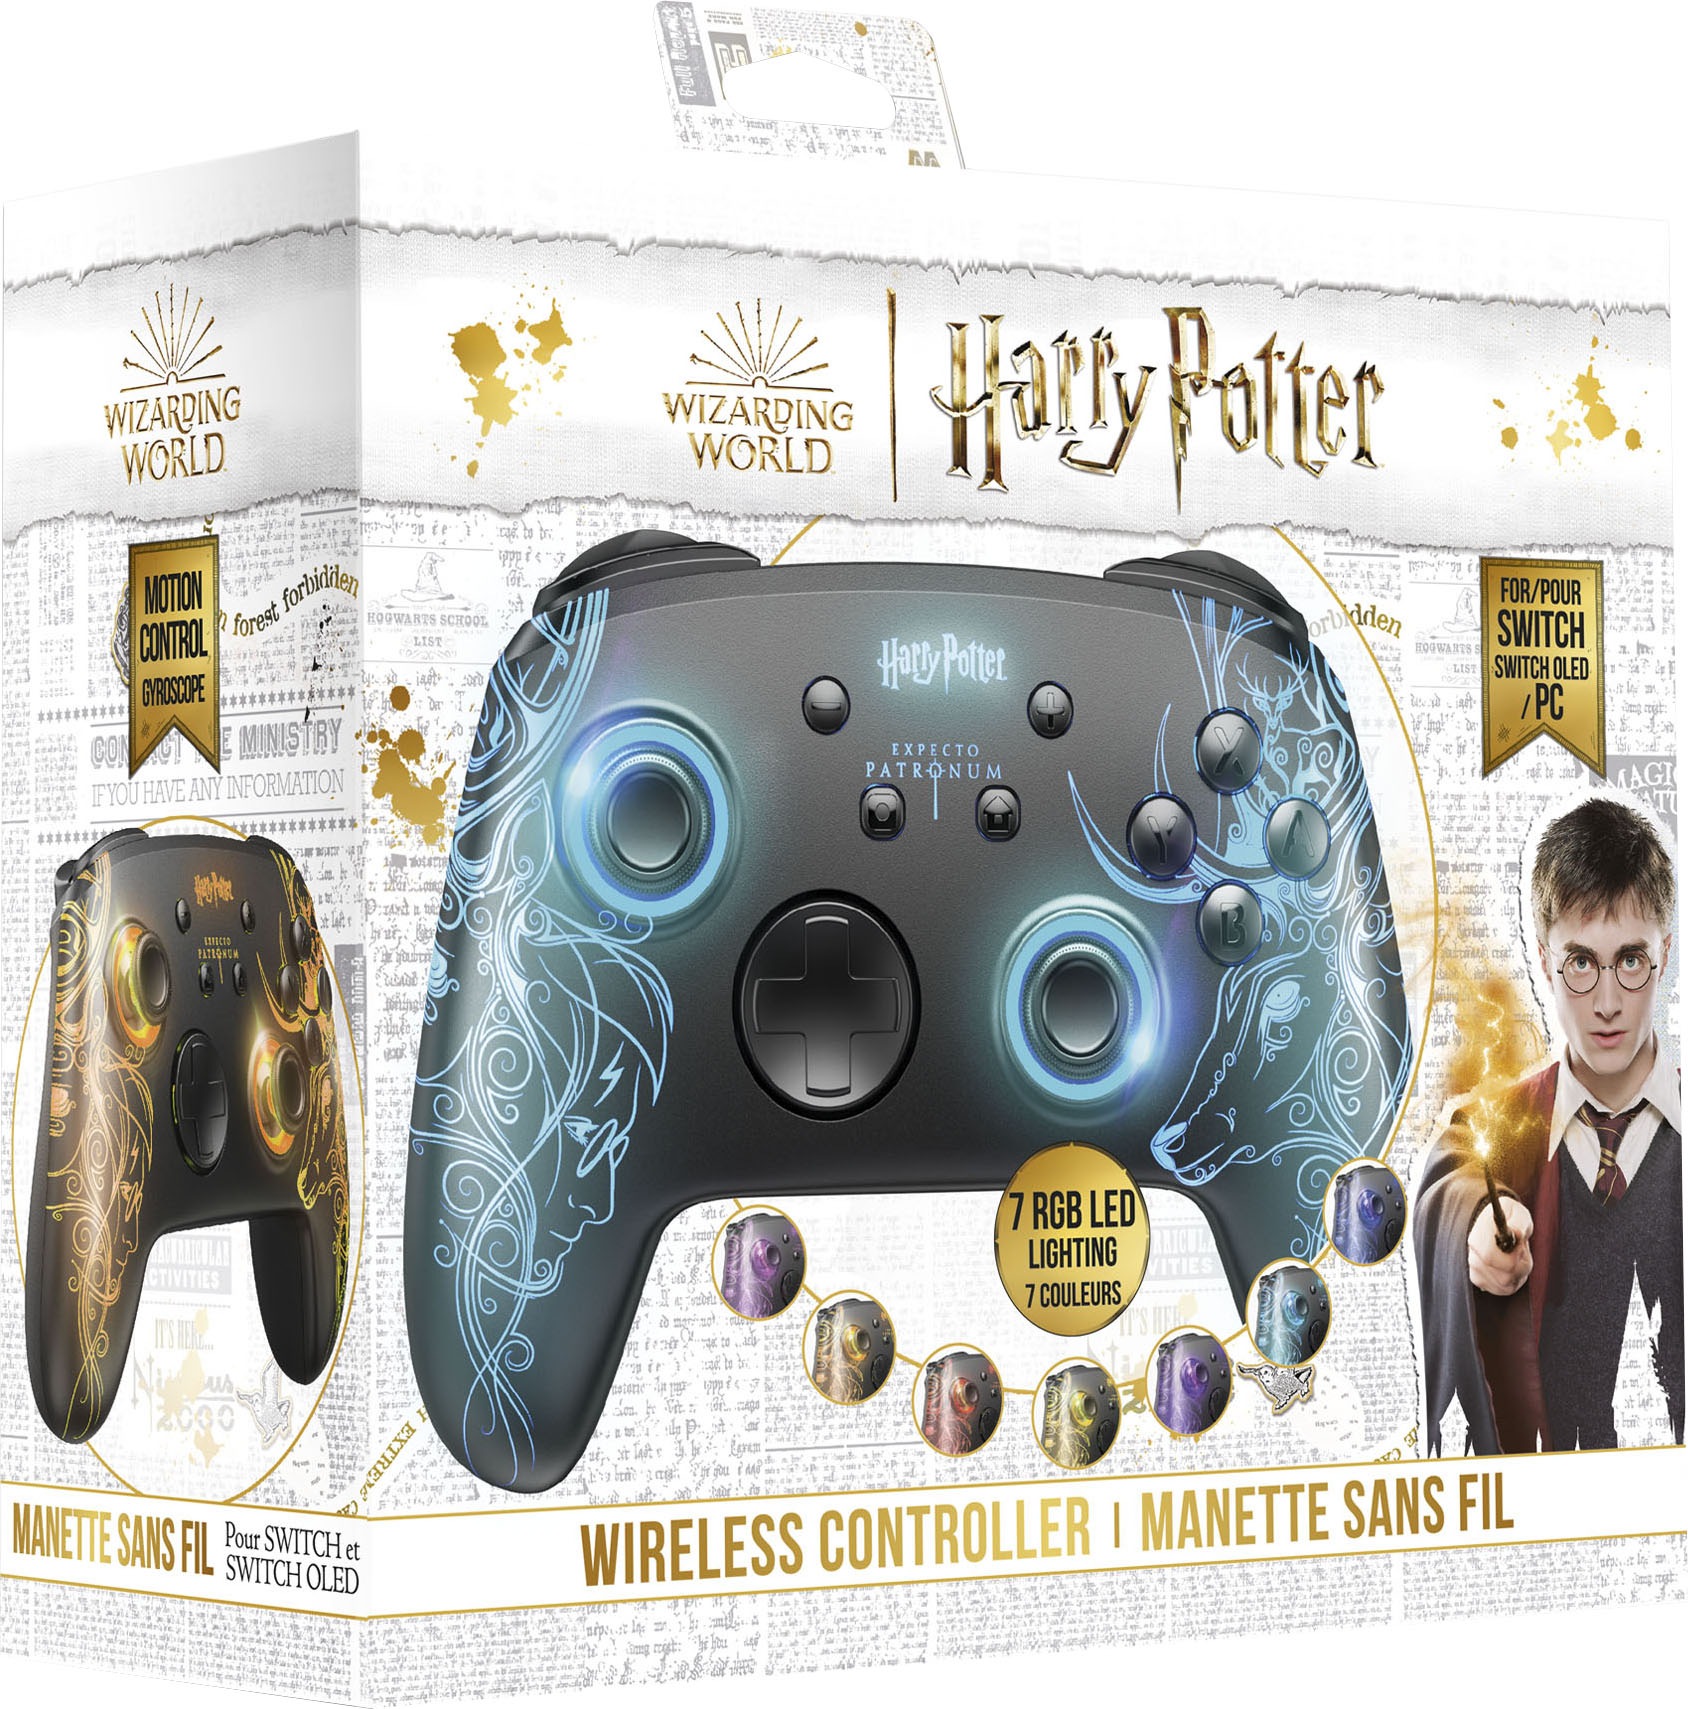 Wireless« Geeks Stag Potter bei Patronus jetzt and online OTTO Nintendo-Controller Freaks »Harry